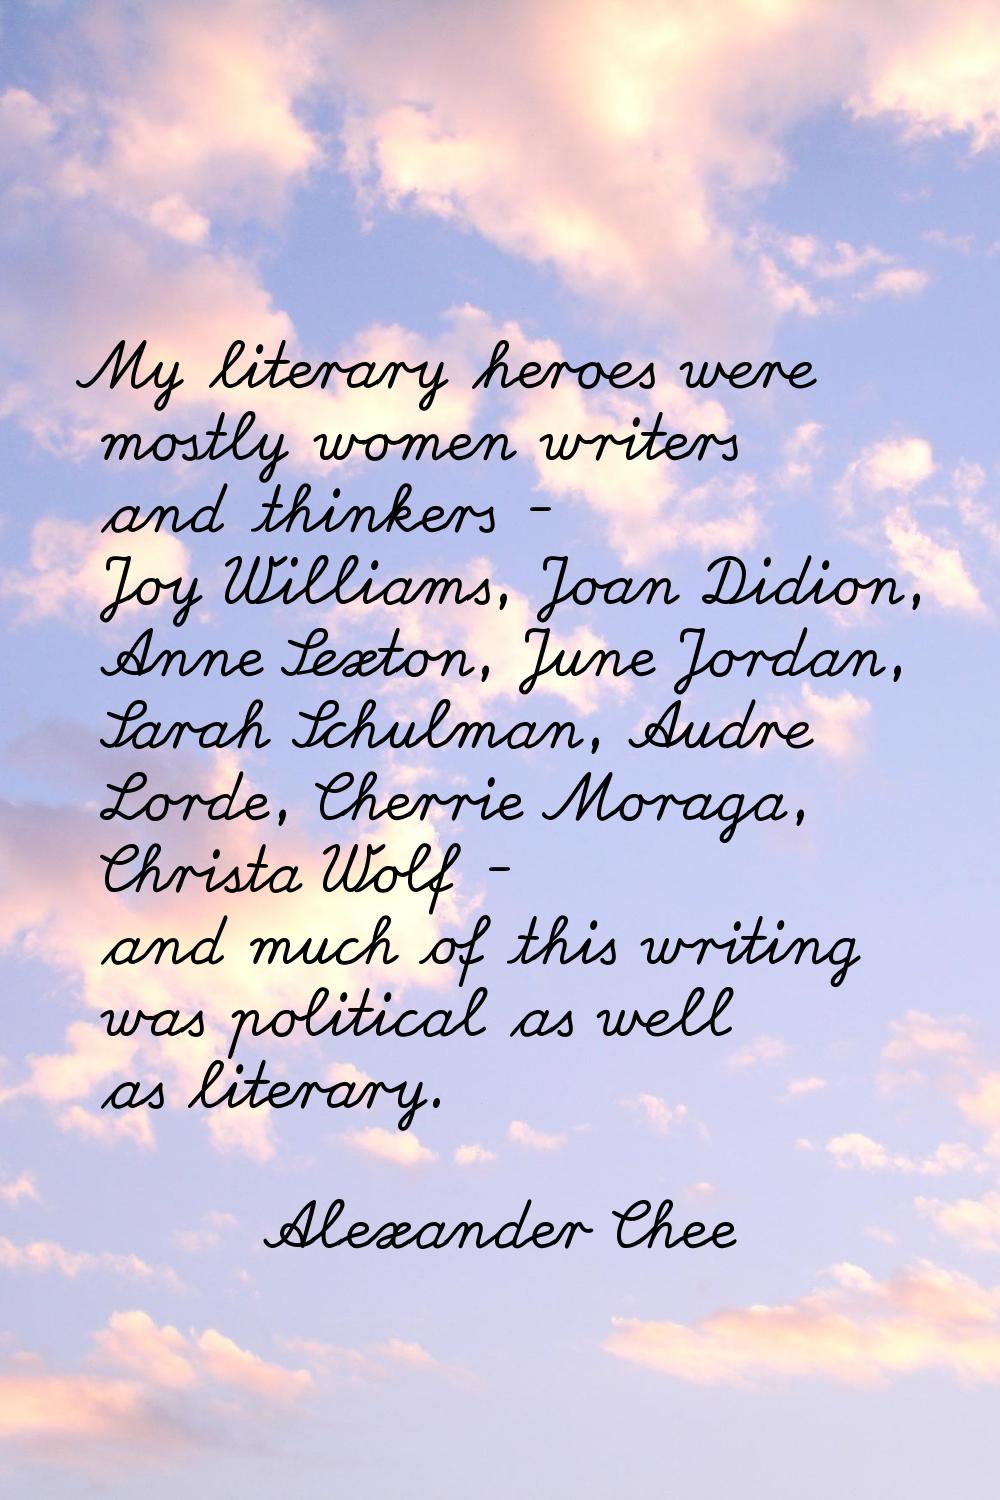 My literary heroes were mostly women writers and thinkers - Joy Williams, Joan Didion, Anne Sexton,